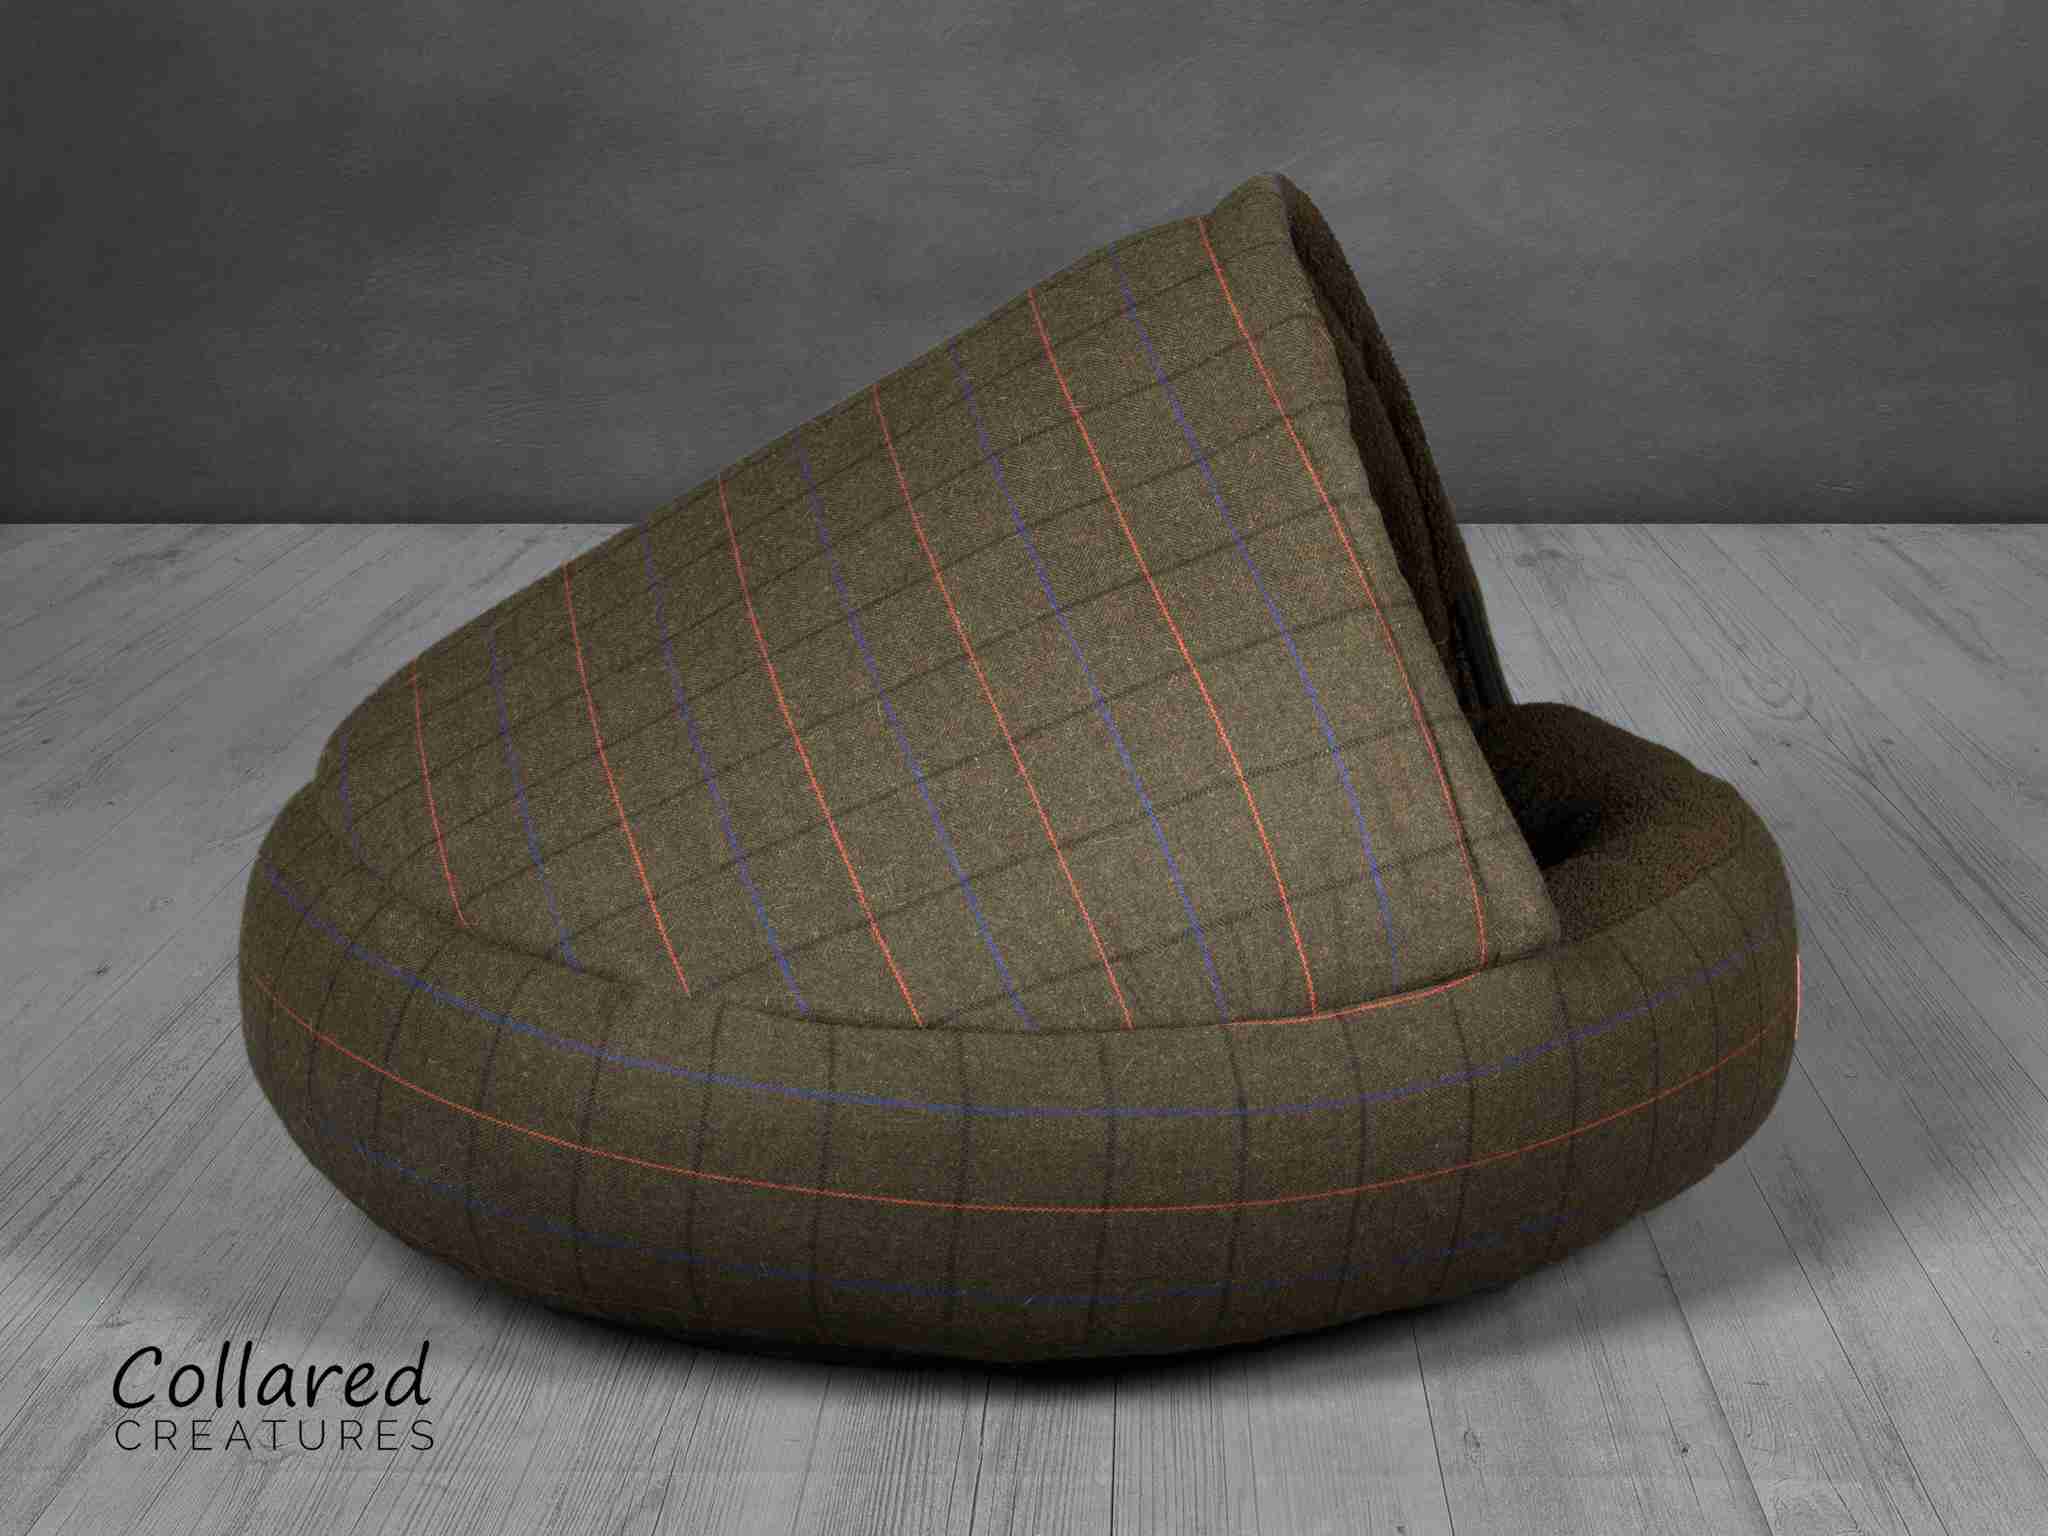 Collared Creatures Green Tweed Deluxe Comfort Cocoon Dog Cave Bed side view